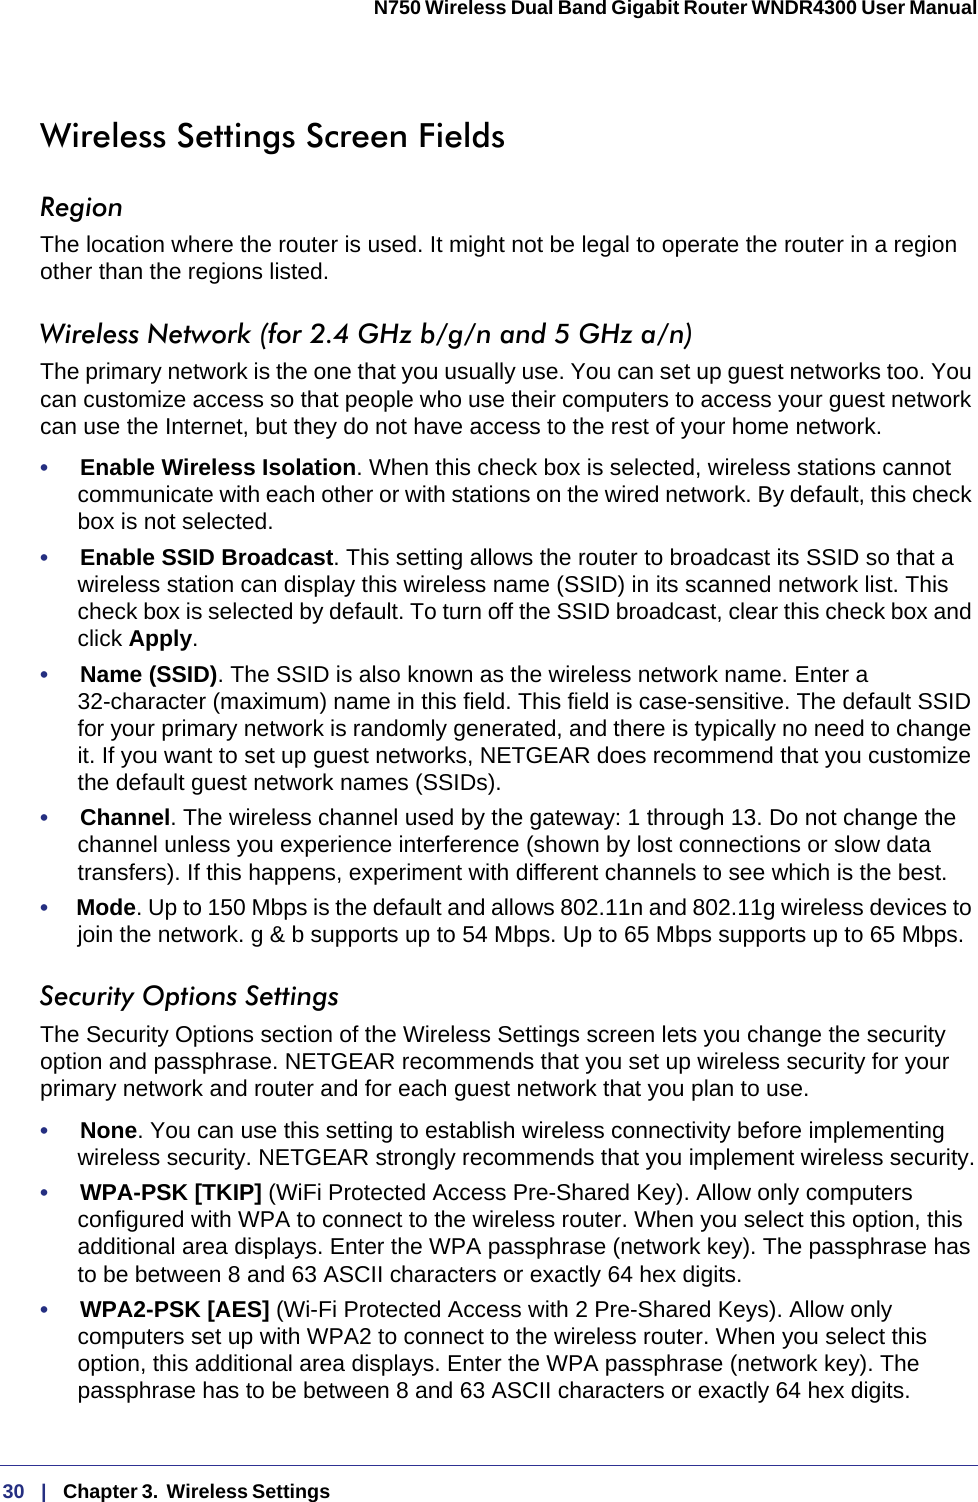 30   |   Chapter 3.  Wireless Settings  N750 Wireless Dual Band Gigabit Router WNDR4300 User Manual Wireless Settings Screen FieldsRegionThe location where the router is used. It might not be legal to operate the router in a region other than the regions listed.Wireless Network (for 2.4 GHz b/g/n and 5 GHz a/n)The primary network is the one that you usually use. You can set up guest networks too. You can customize access so that people who use their computers to access your guest network can use the Internet, but they do not have access to the rest of your home network. •     Enable Wireless Isolation. When this check box is selected, wireless stations cannot communicate with each other or with stations on the wired network. By default, this check box is not selected.•     Enable SSID Broadcast. This setting allows the router to broadcast its SSID so that a wireless station can display this wireless name (SSID) in its scanned network list. This check box is selected by default. To turn off the SSID broadcast, clear this check box and click Apply.•     Name (SSID). The SSID is also known as the wireless network name. Enter a 32-character (maximum) name in this field. This field is case-sensitive. The default SSID for your primary network is randomly generated, and there is typically no need to change it. If you want to set up guest networks, NETGEAR does recommend that you customize the default guest network names (SSIDs).•     Channel. The wireless channel used by the gateway: 1 through 13. Do not change the channel unless you experience interference (shown by lost connections or slow data transfers). If this happens, experiment with different channels to see which is the best.•     Mode. Up to 150 Mbps is the default and allows 802.11n and 802.11g wireless devices to join the network. g &amp; b supports up to 54 Mbps. Up to 65 Mbps supports up to 65 Mbps.Security Options SettingsThe Security Options section of the Wireless Settings screen lets you change the security option and passphrase. NETGEAR recommends that you set up wireless security for your primary network and router and for each guest network that you plan to use. •     None. You can use this setting to establish wireless connectivity before implementing wireless security. NETGEAR strongly recommends that you implement wireless security.•     WPA-PSK [TKIP] (WiFi Protected Access Pre-Shared Key). Allow only computers configured with WPA to connect to the wireless router. When you select this option, this additional area displays. Enter the WPA passphrase (network key). The passphrase has to be between 8 and 63 ASCII characters or exactly 64 hex digits.•     WPA2-PSK [AES] (Wi-Fi Protected Access with 2 Pre-Shared Keys). Allow only computers set up with WPA2 to connect to the wireless router. When you select this option, this additional area displays. Enter the WPA passphrase (network key). The passphrase has to be between 8 and 63 ASCII characters or exactly 64 hex digits.